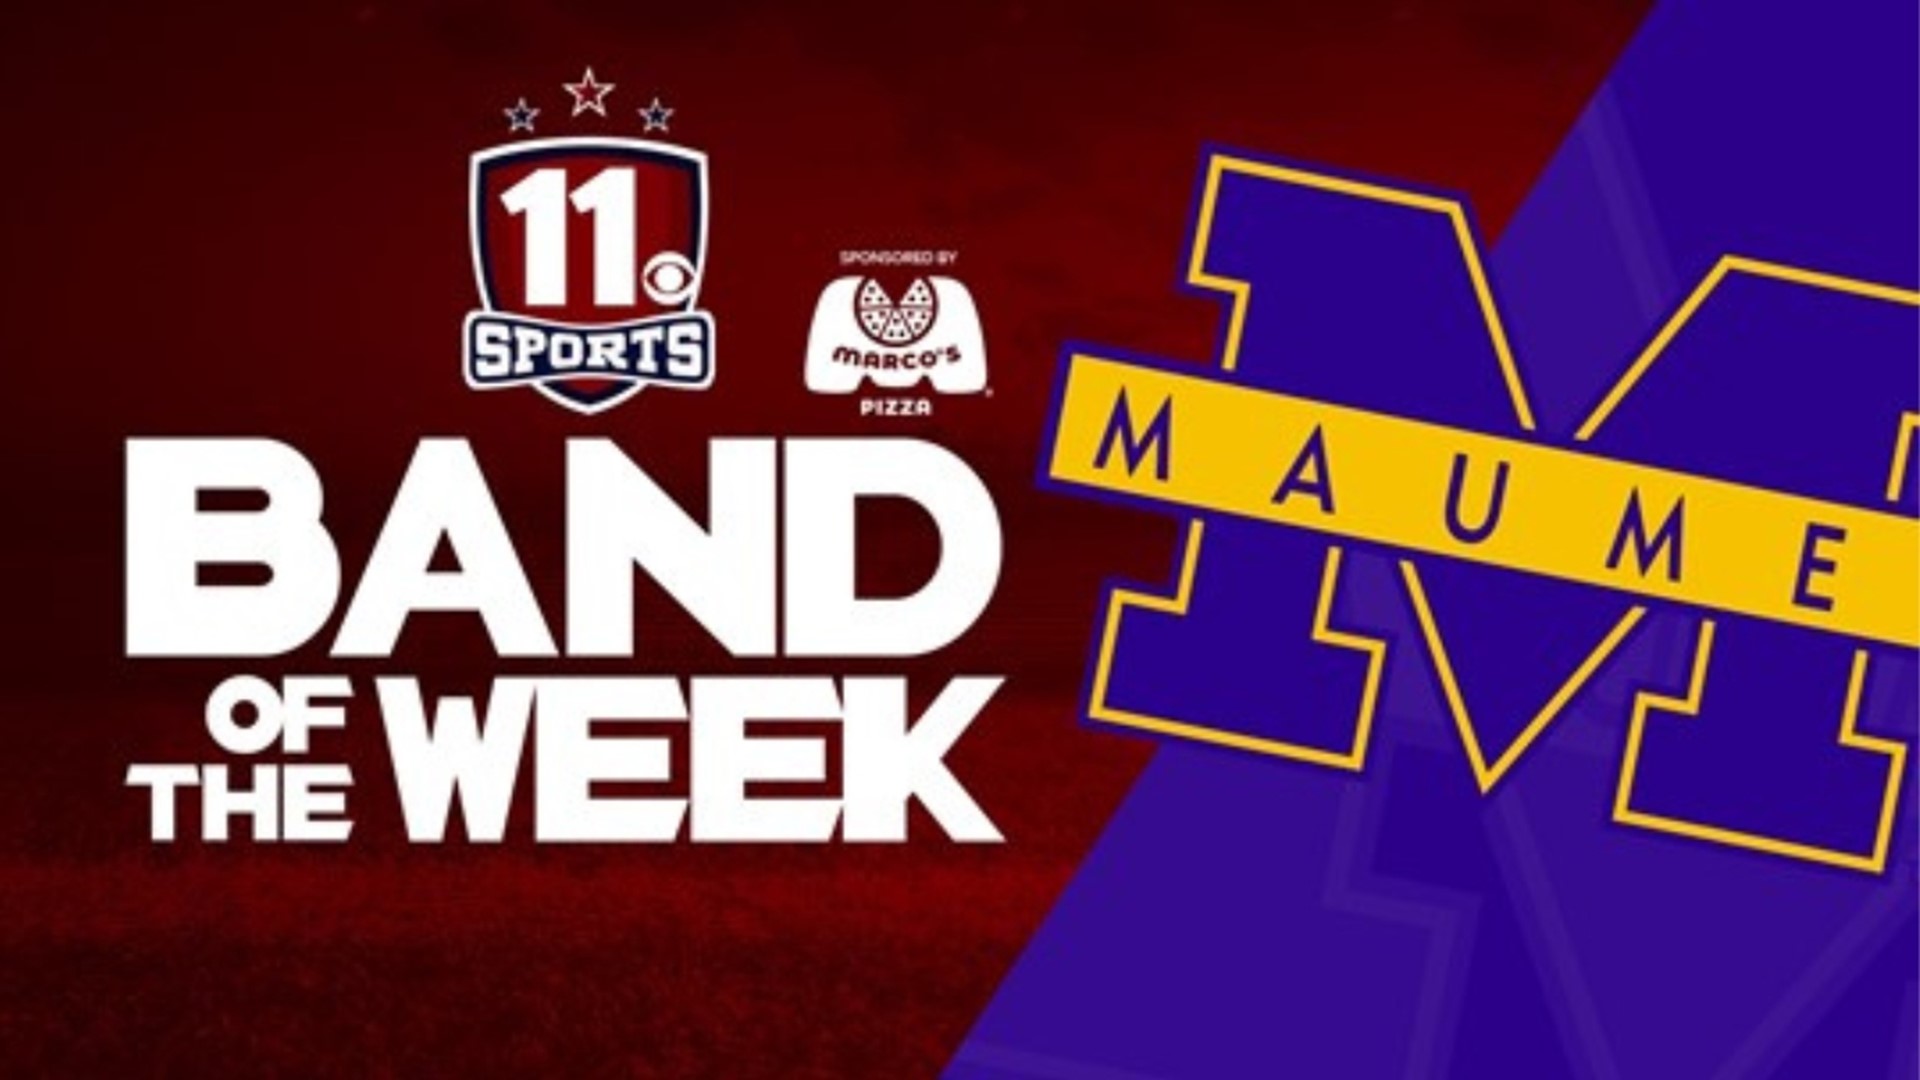 Maumee High School band half-time show, Sept. 23, 2022 | WTOL 11 Band of the Week!